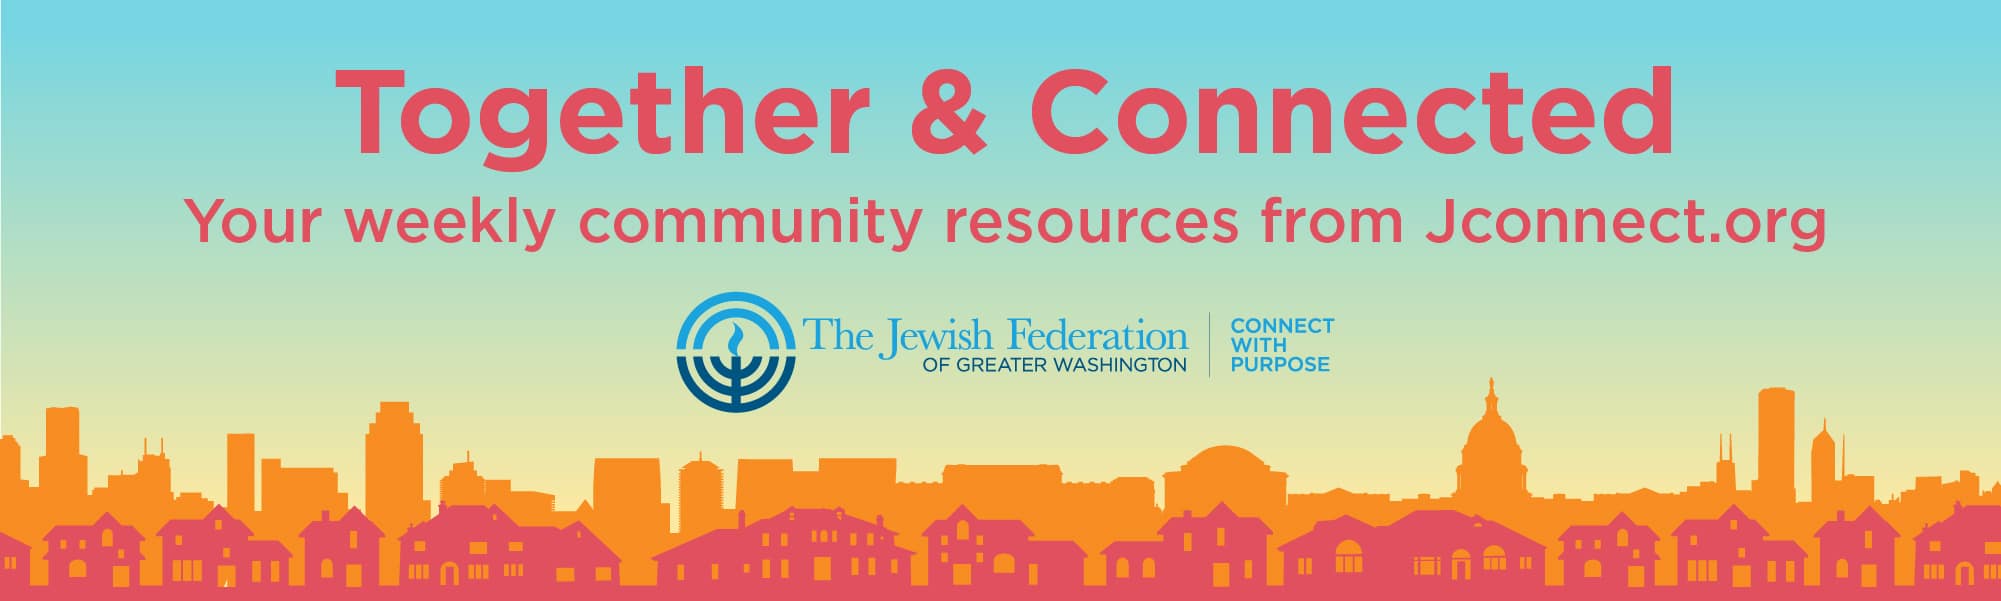 Together & Connected Resources from Jconnect.org